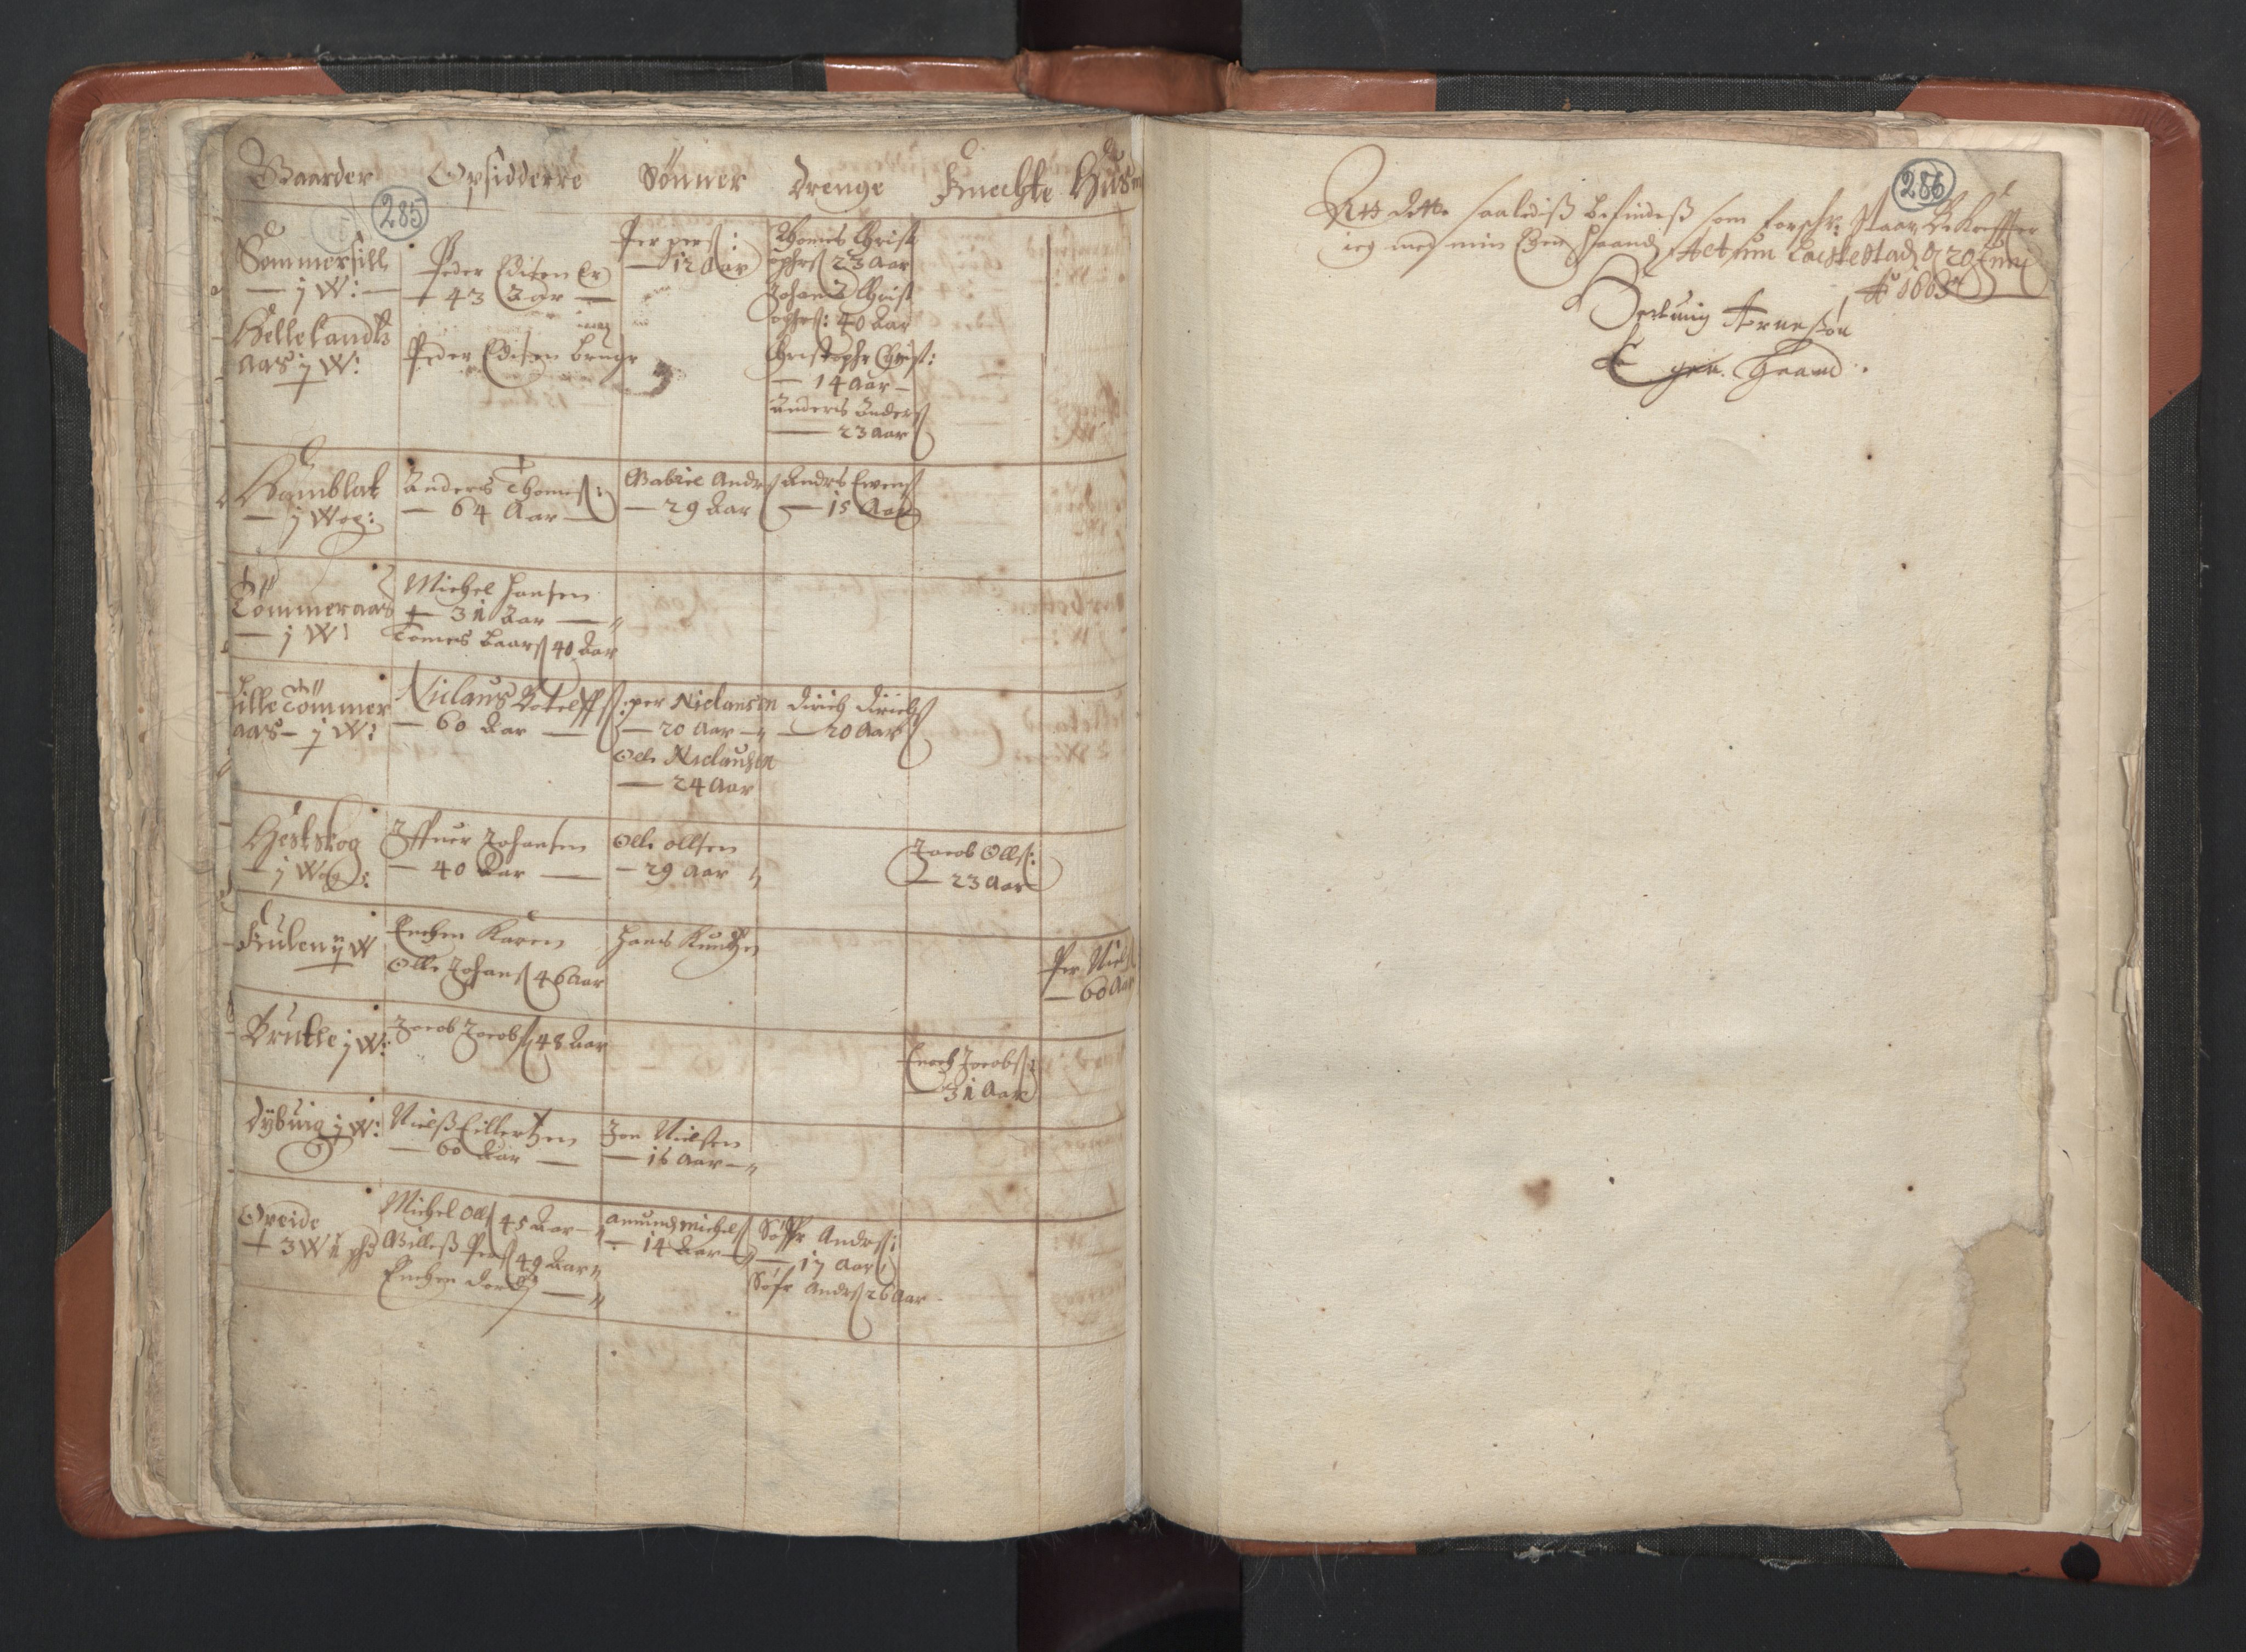 RA, Vicar's Census 1664-1666, no. 35: Helgeland deanery and Salten deanery, 1664-1666, p. 285-286